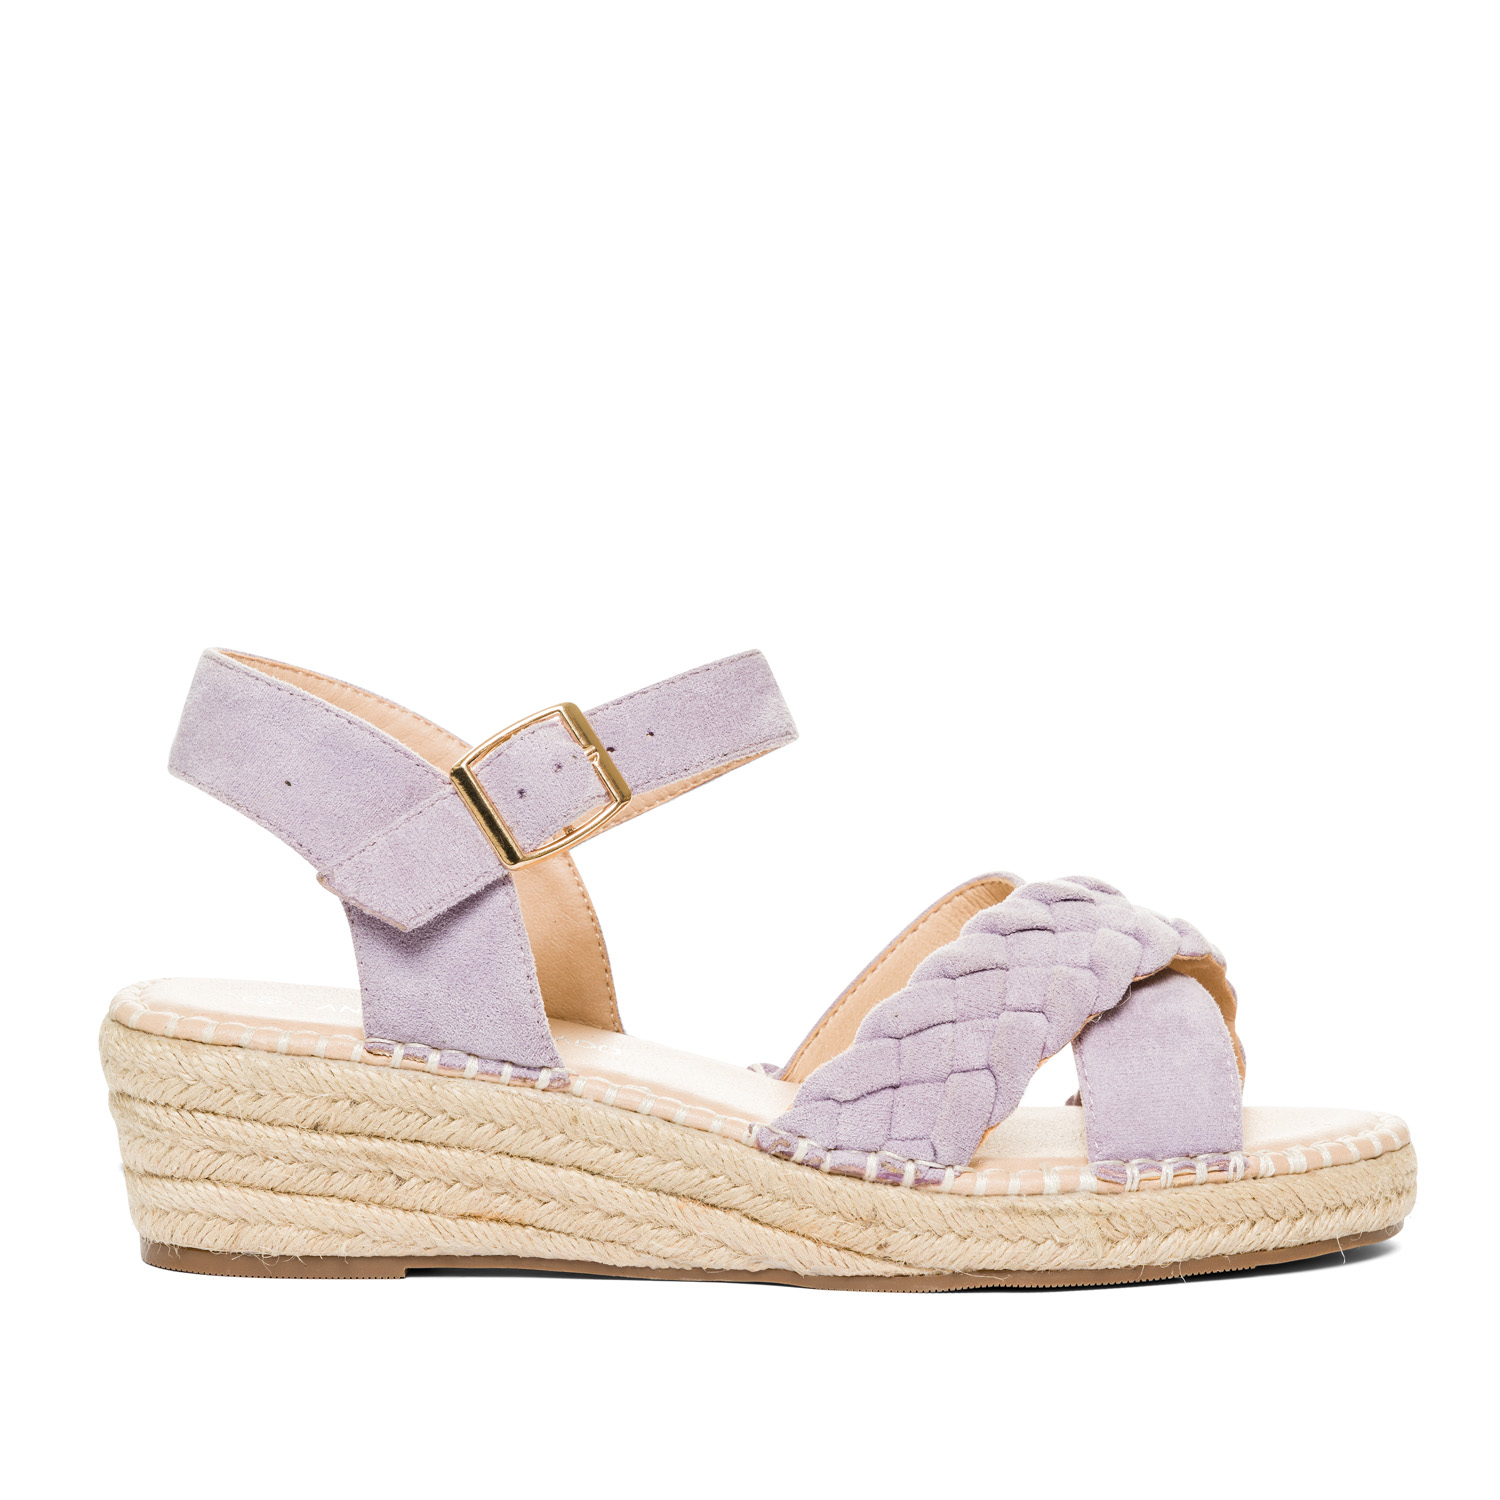 Purple faux suede sandals with jute wedge 